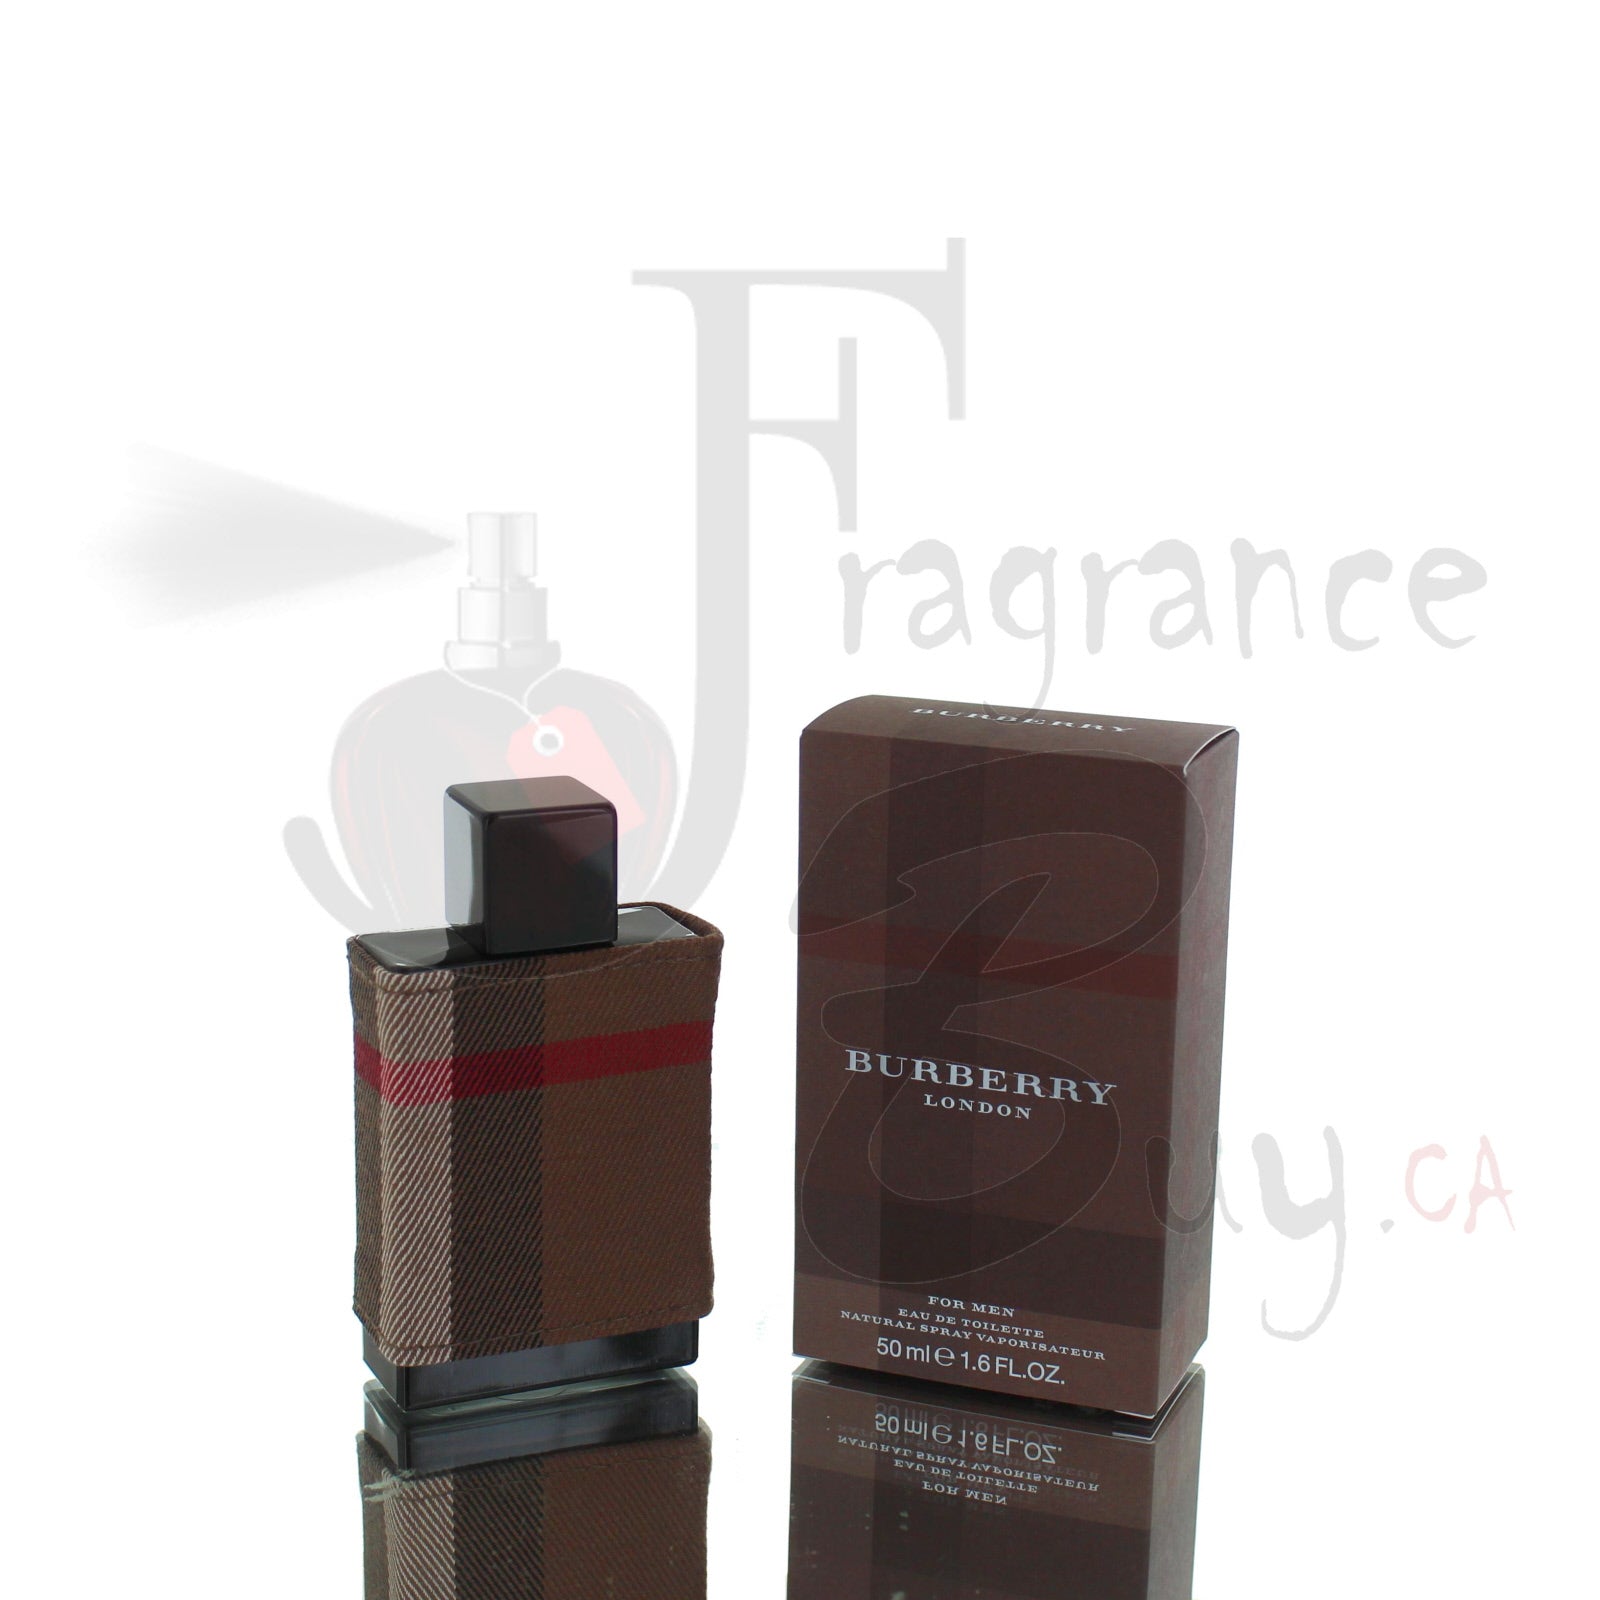  — Burberry London (Fabric) Man Cologne | Online |  